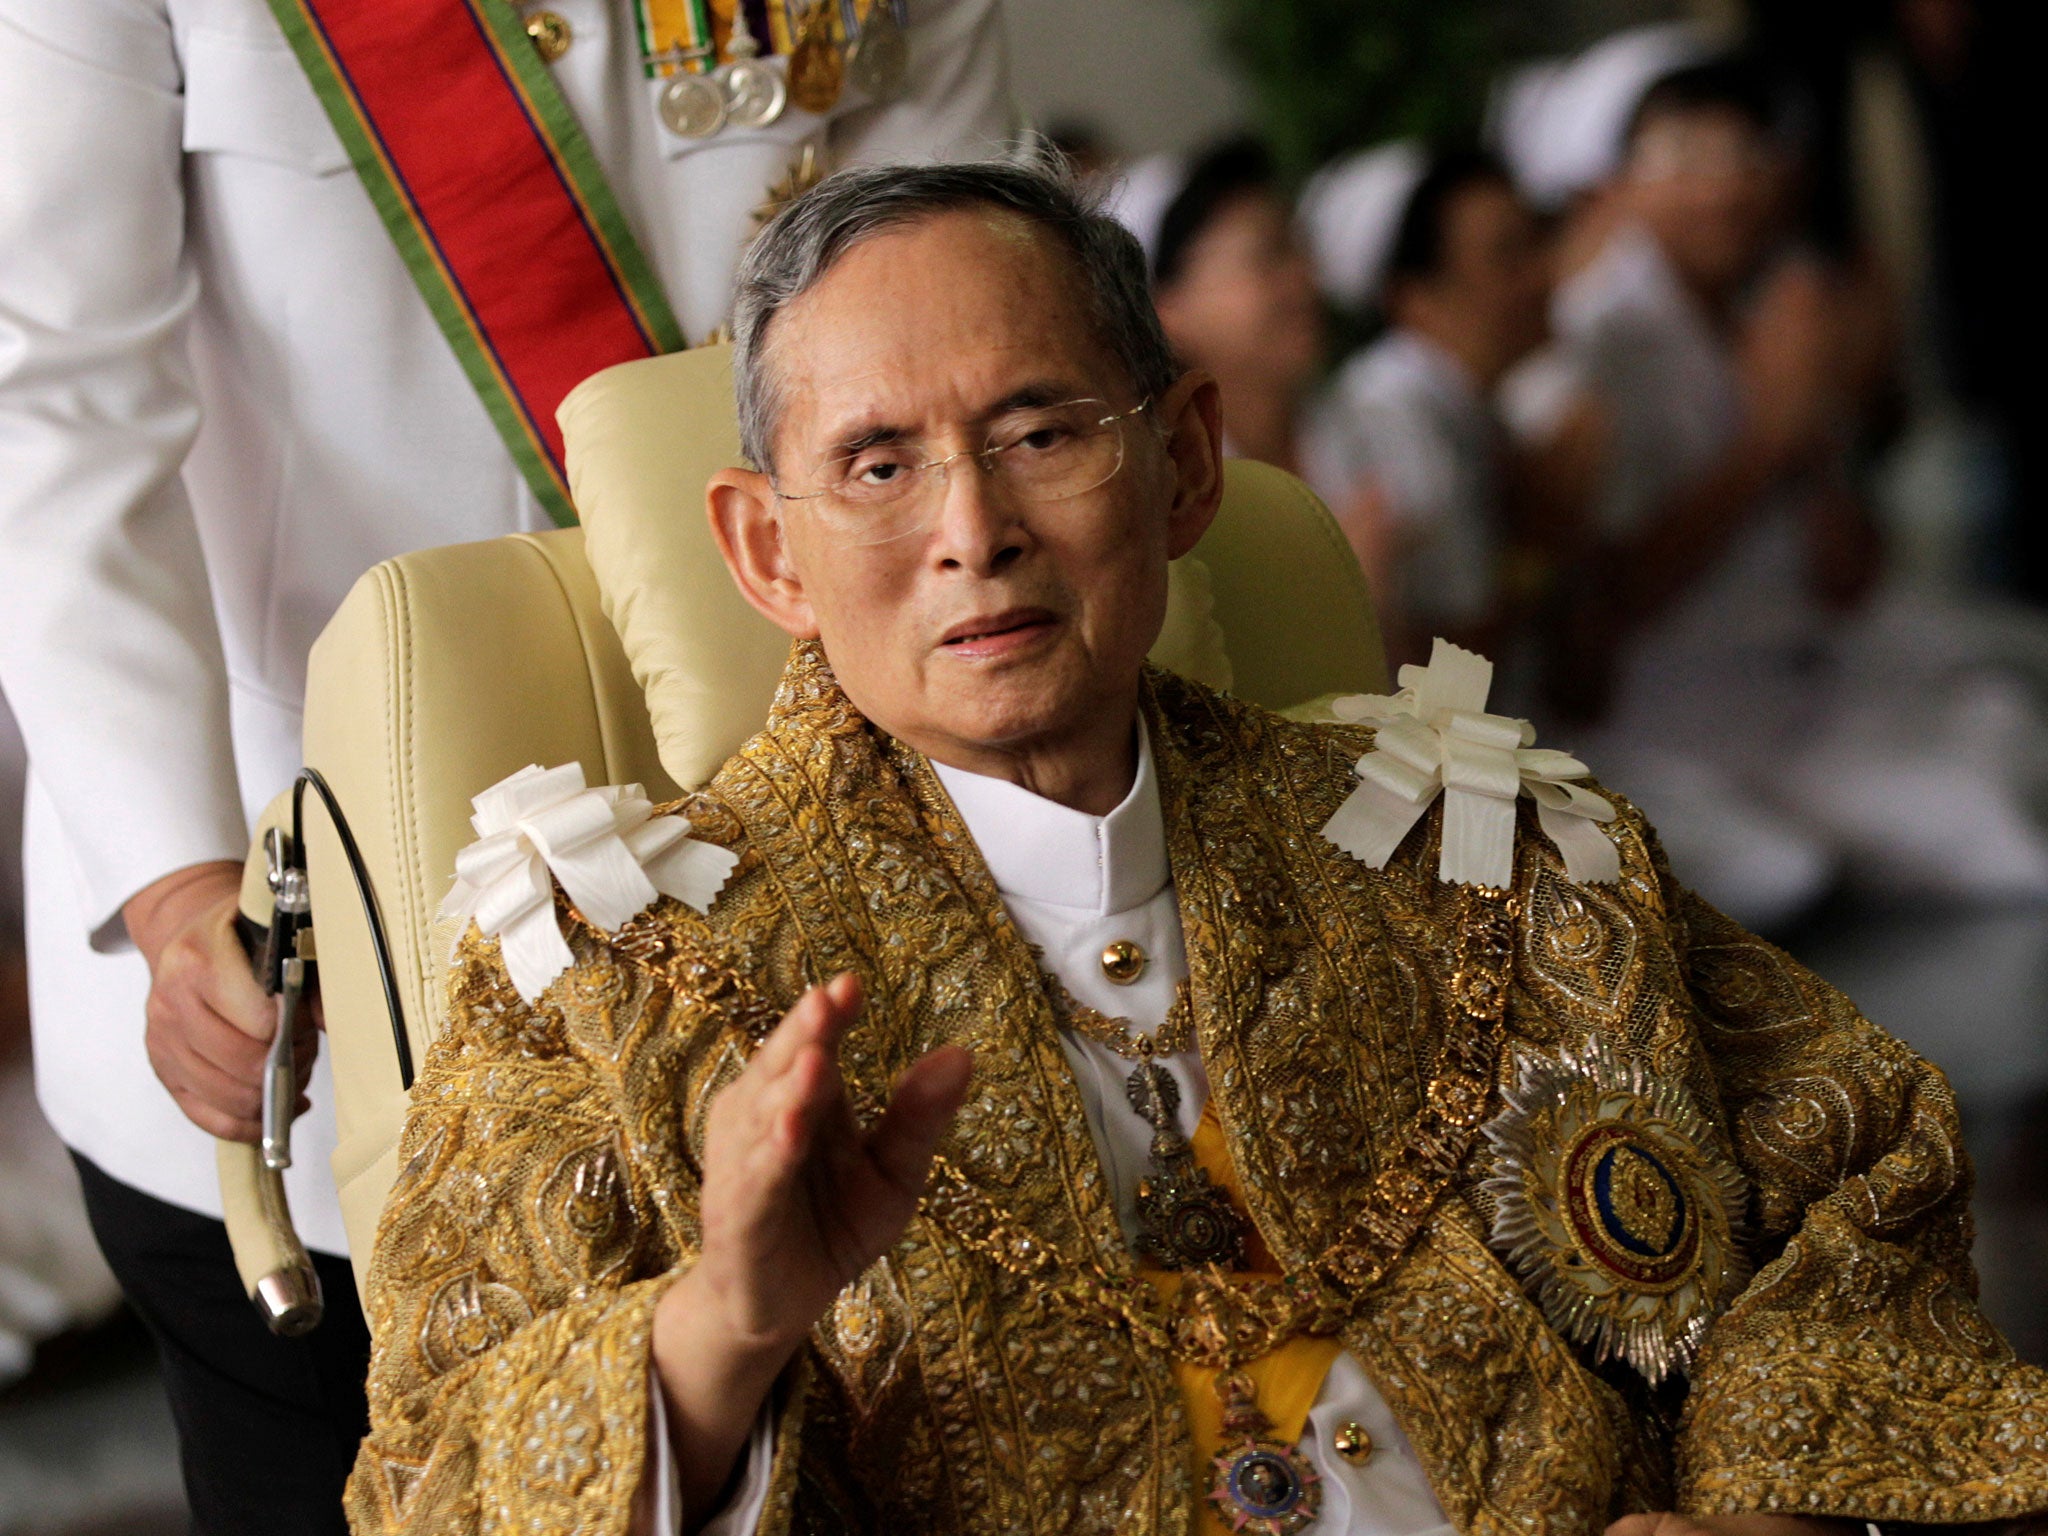 A huge crematorium is being erected after the death of Bhumibol Adulyadej